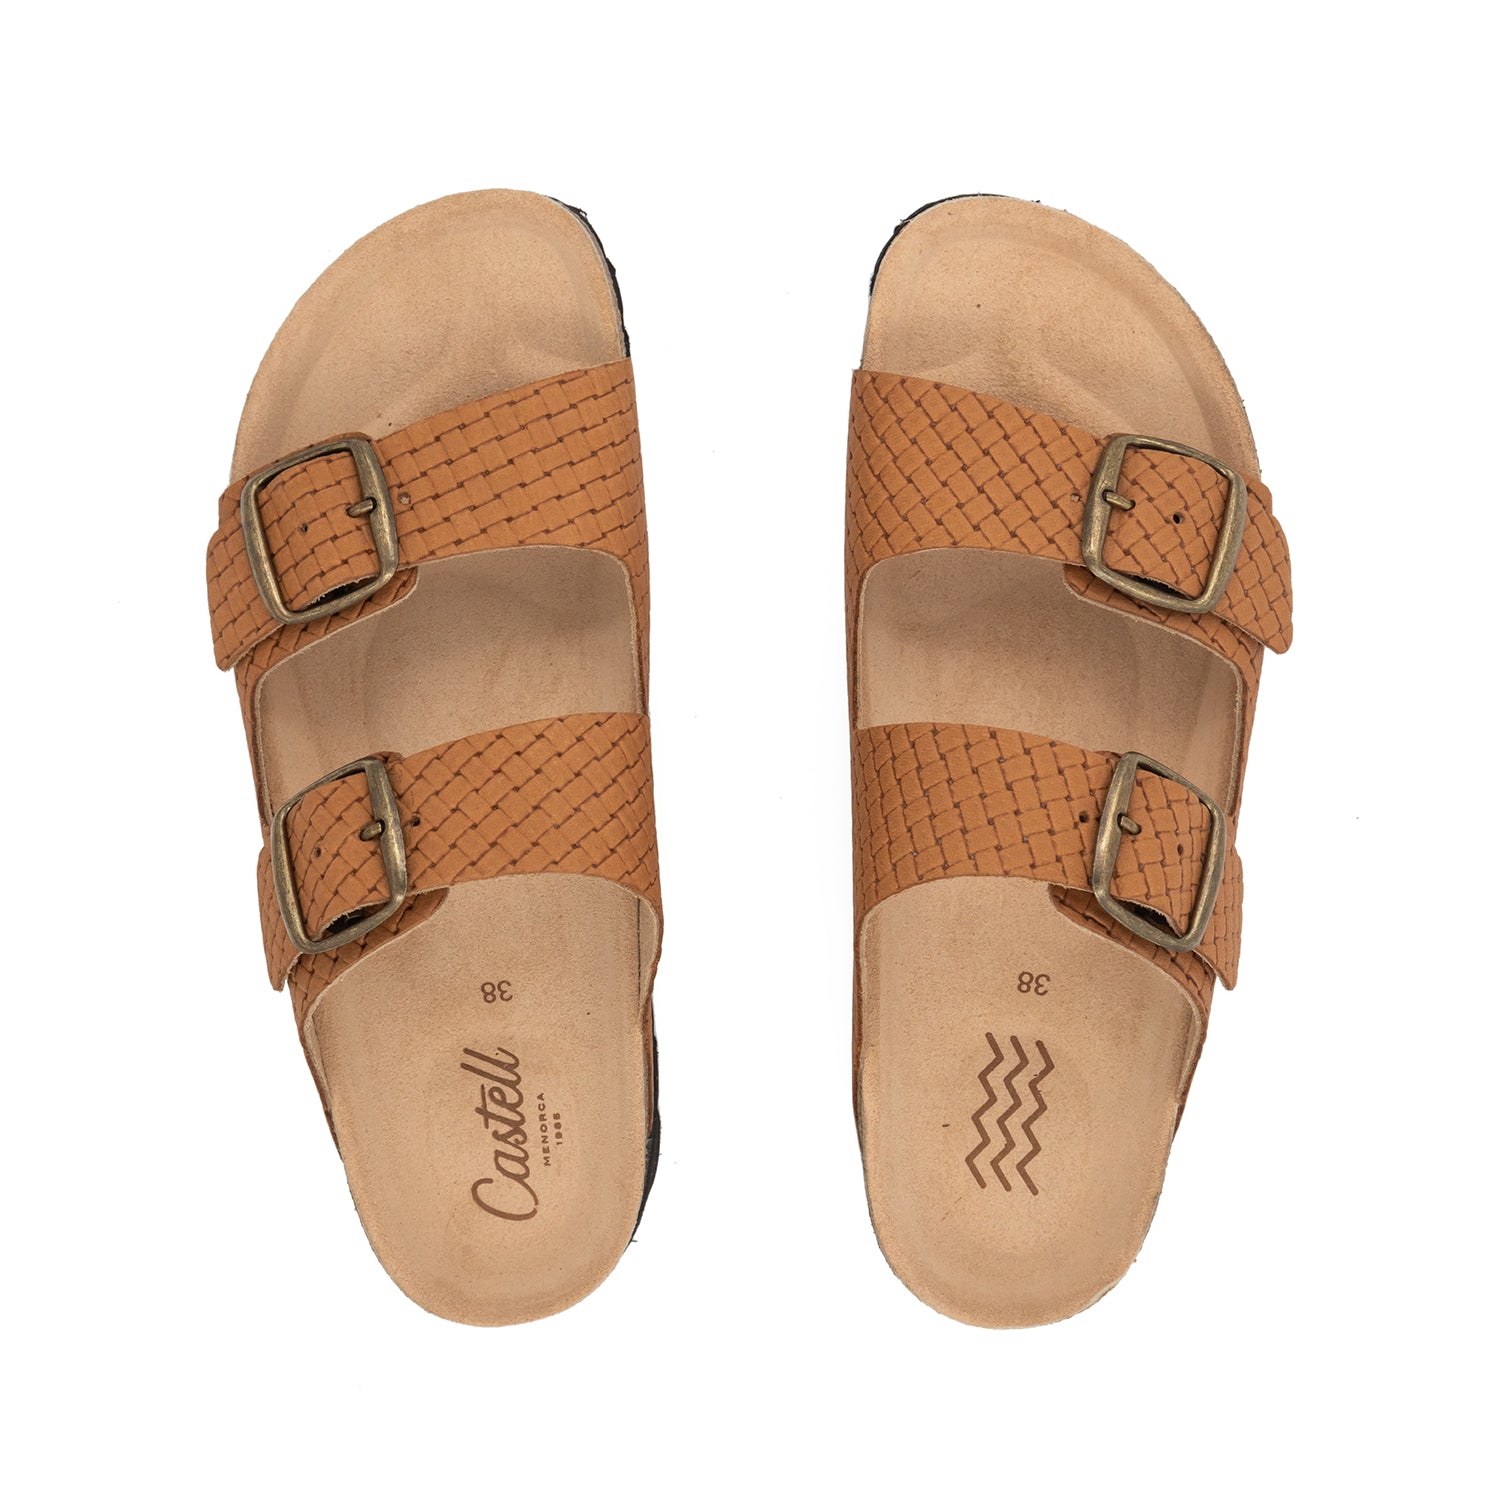 Plain Leather Sandal With Open Toe For Women - 1727 M Greco Trenza